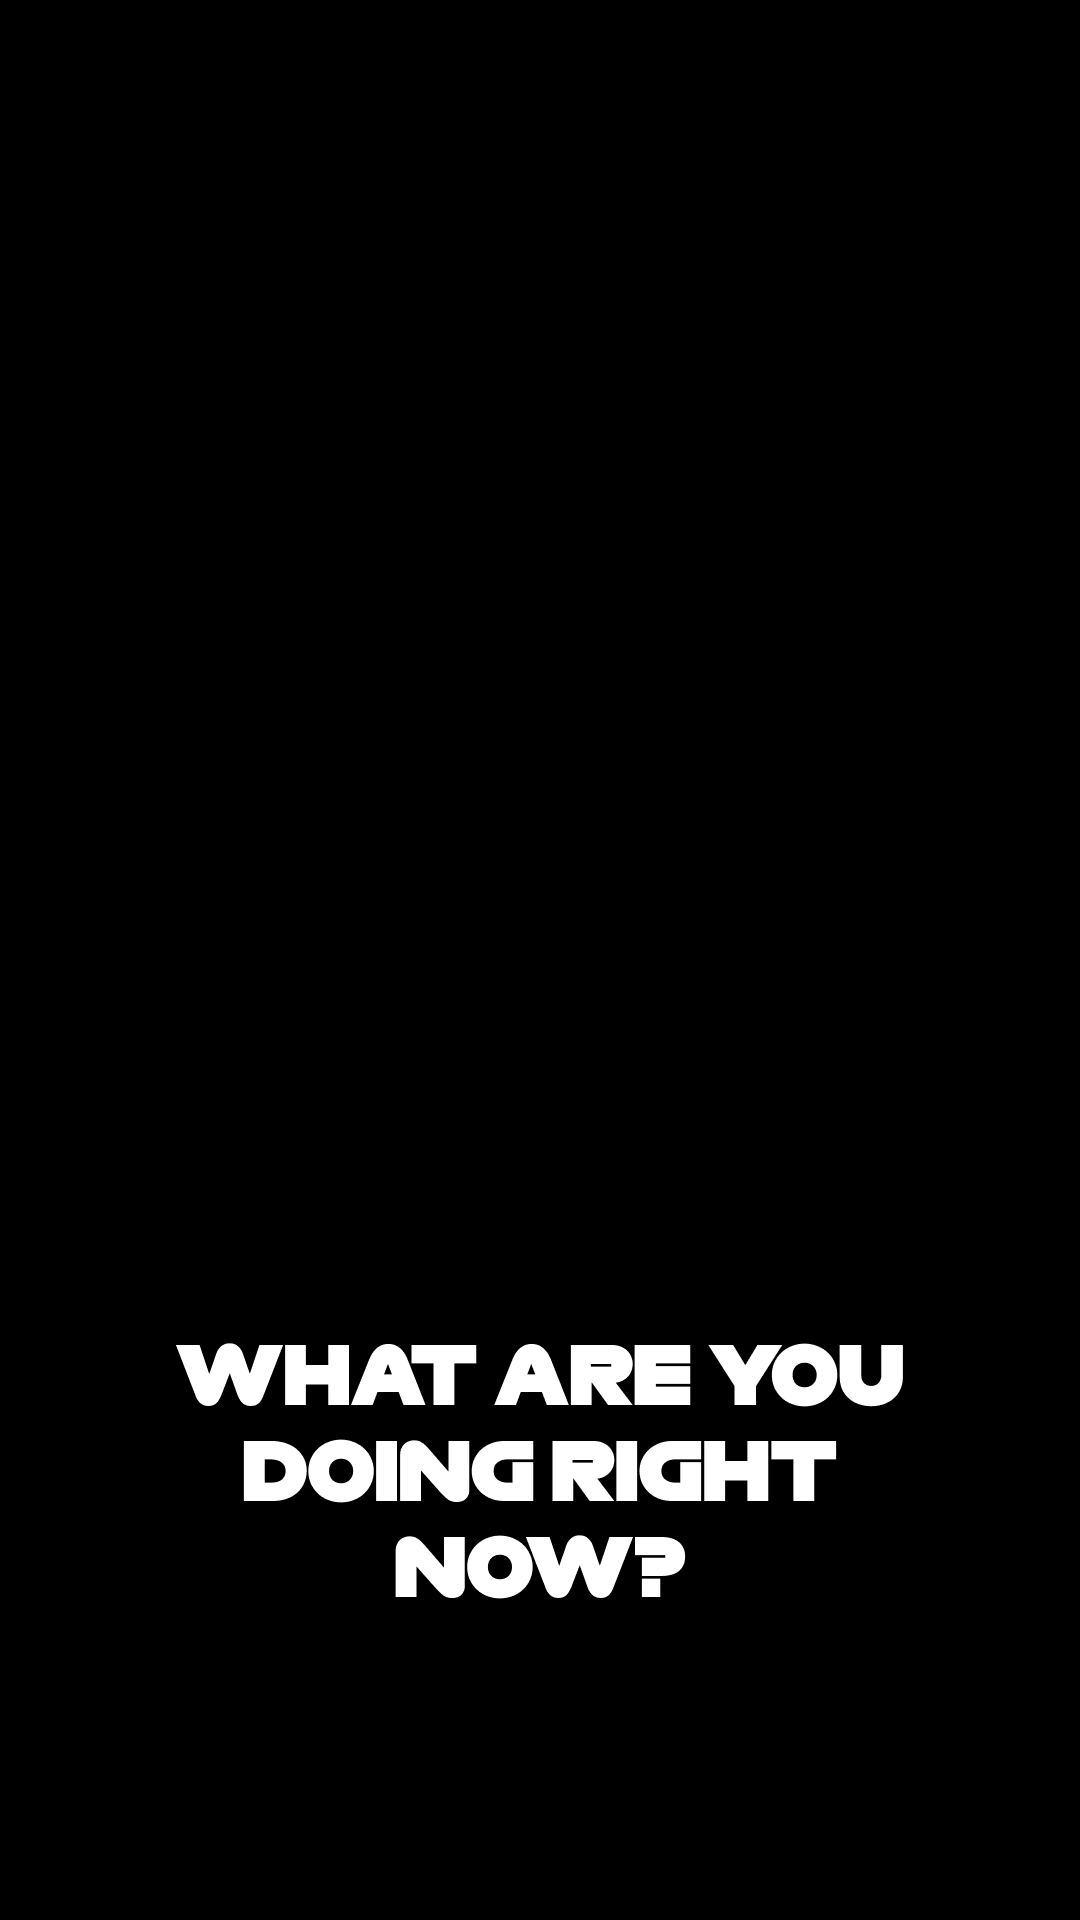 Макс Подзігун  F1PODCAST on Twitter jockowillink Very important  question Made a simple wallpaper to be reminded Thanks Jocko Feel free  to share httpstcolHCdnu7MMY  Twitter